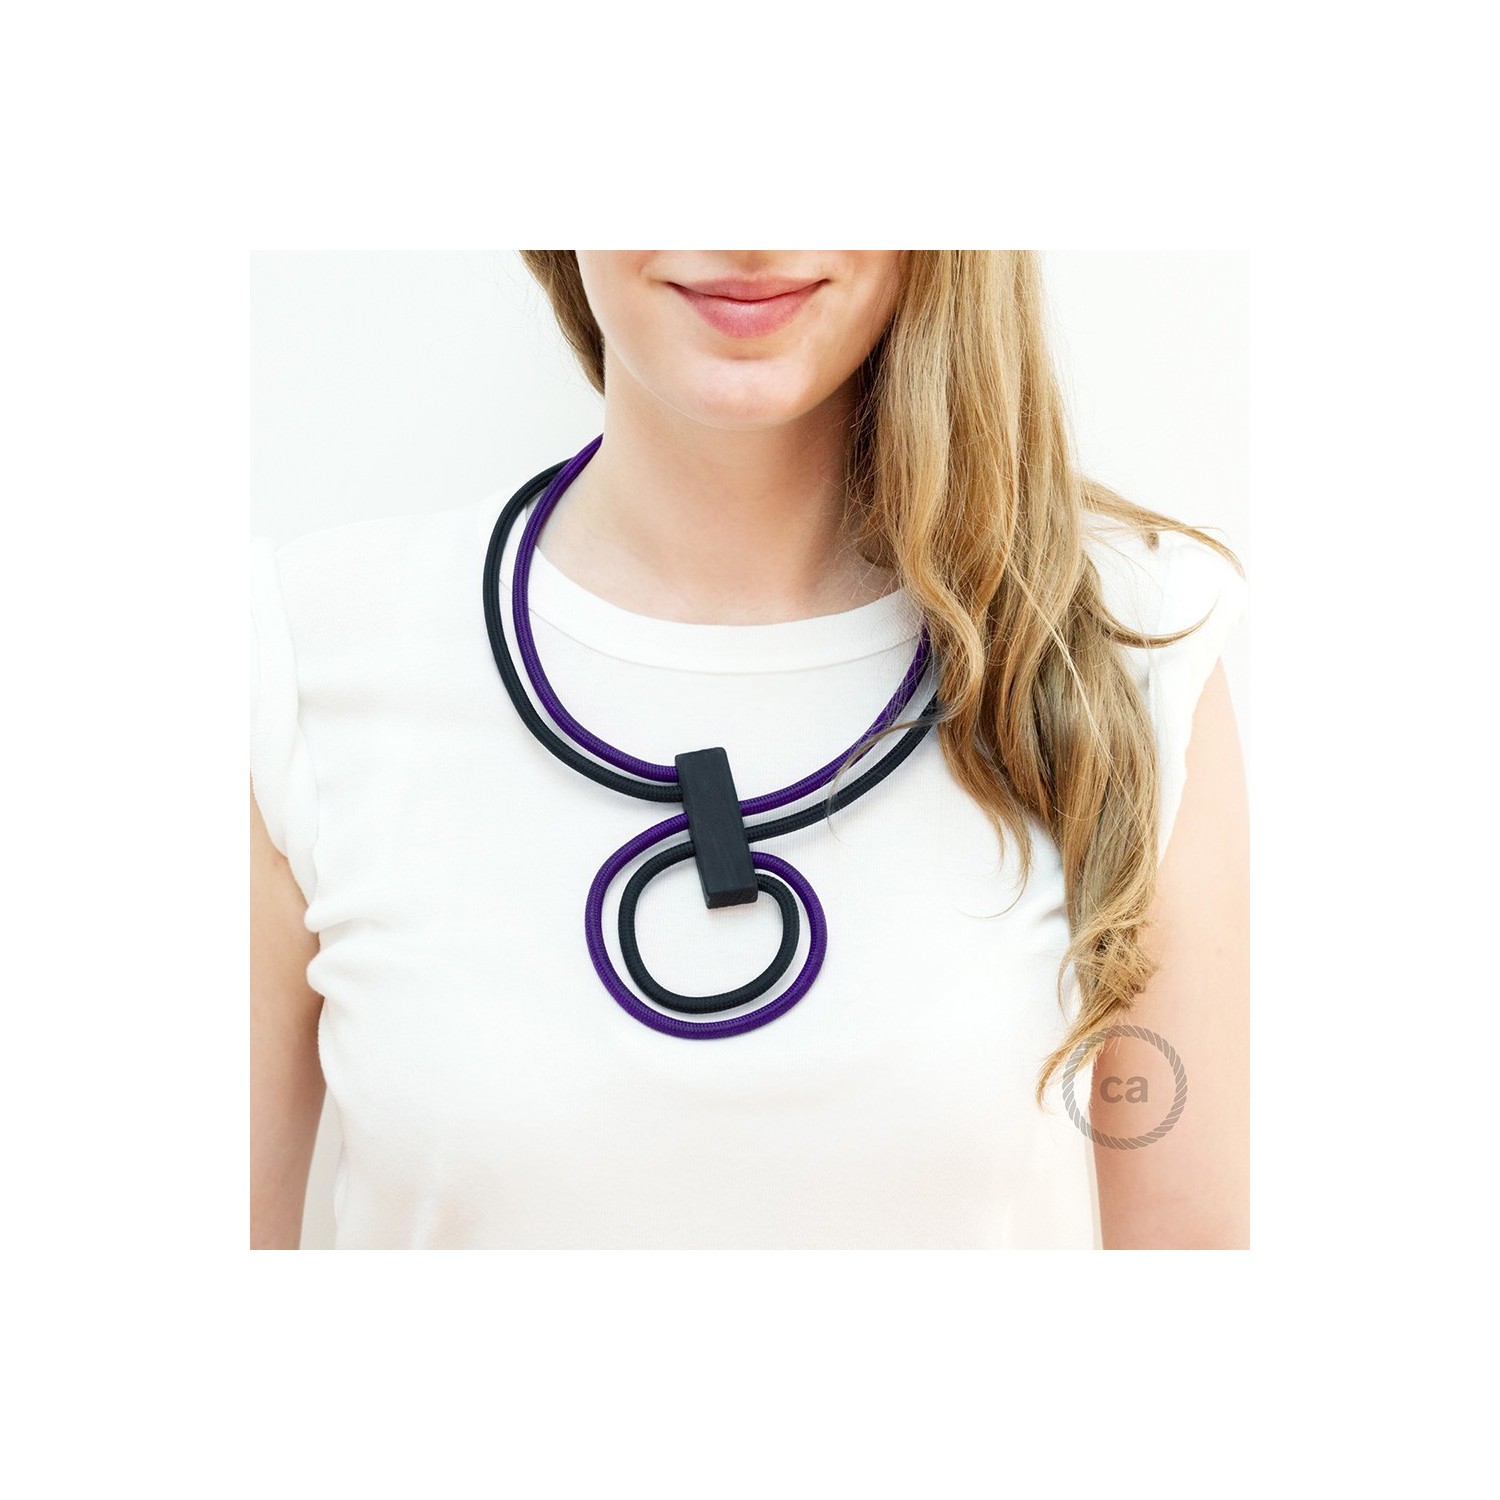 Infinity necklace adjustable bicolor Violet RM14 and Black RM04.